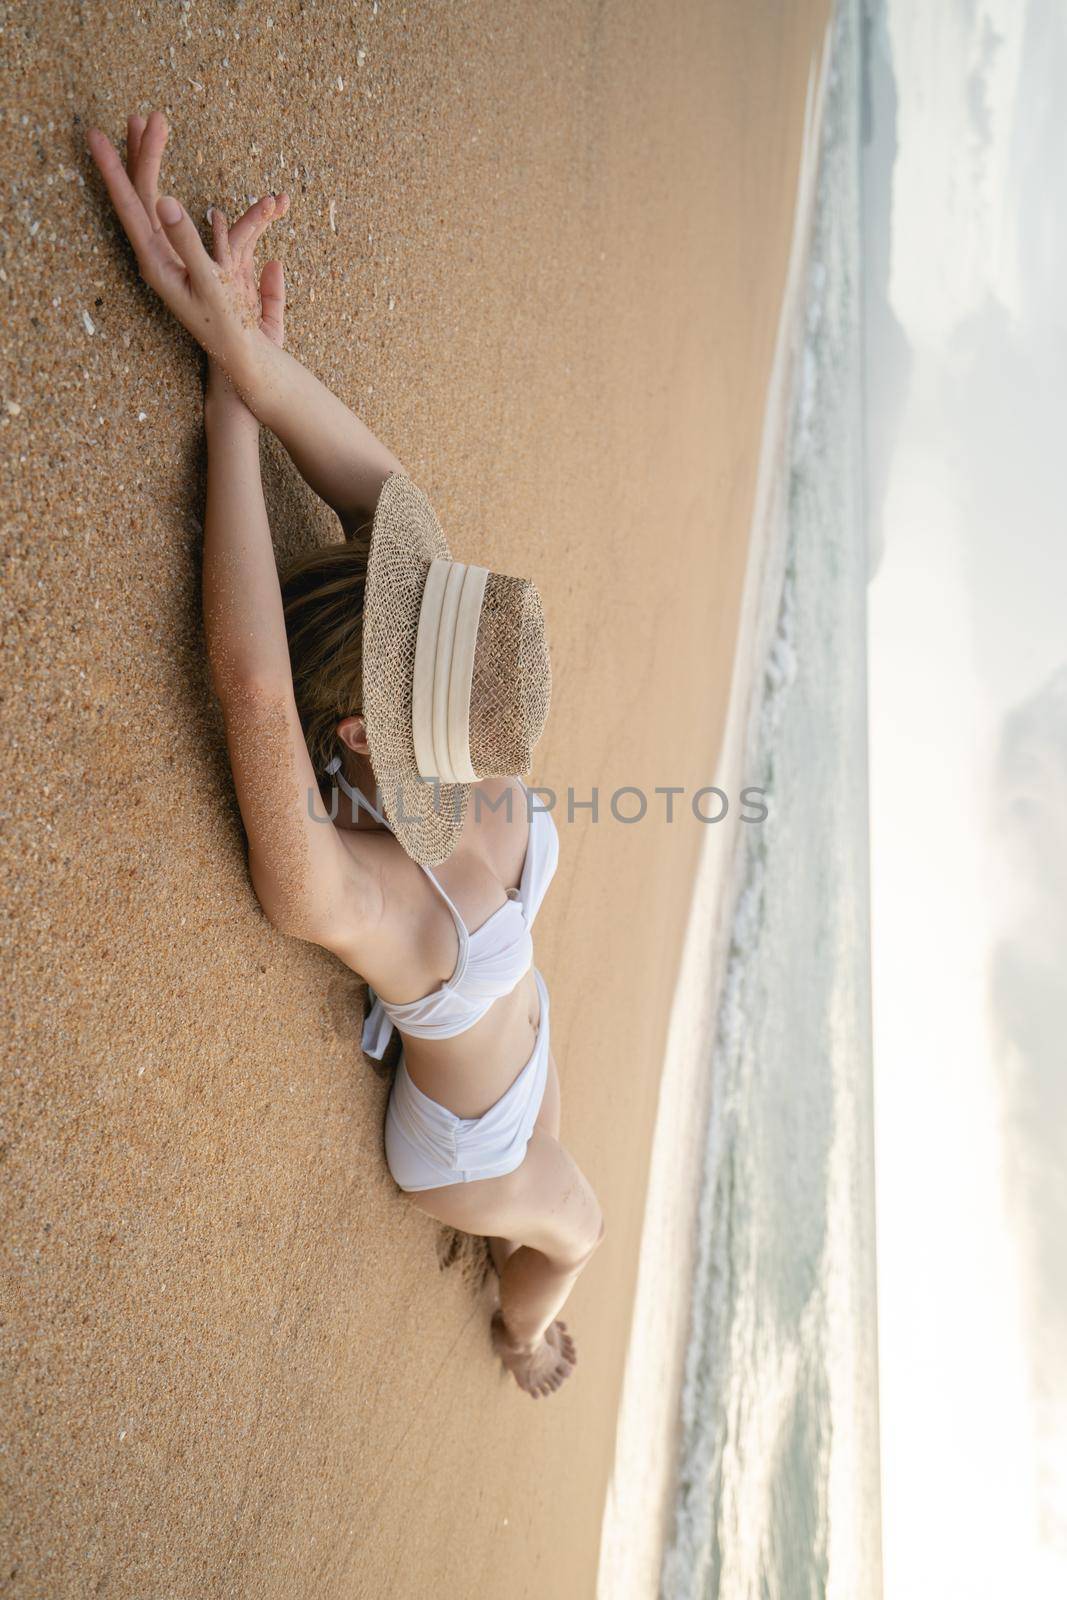 Woman in bikini lying down on sand beach with straw hat cover her face, relaxing sunbathing.